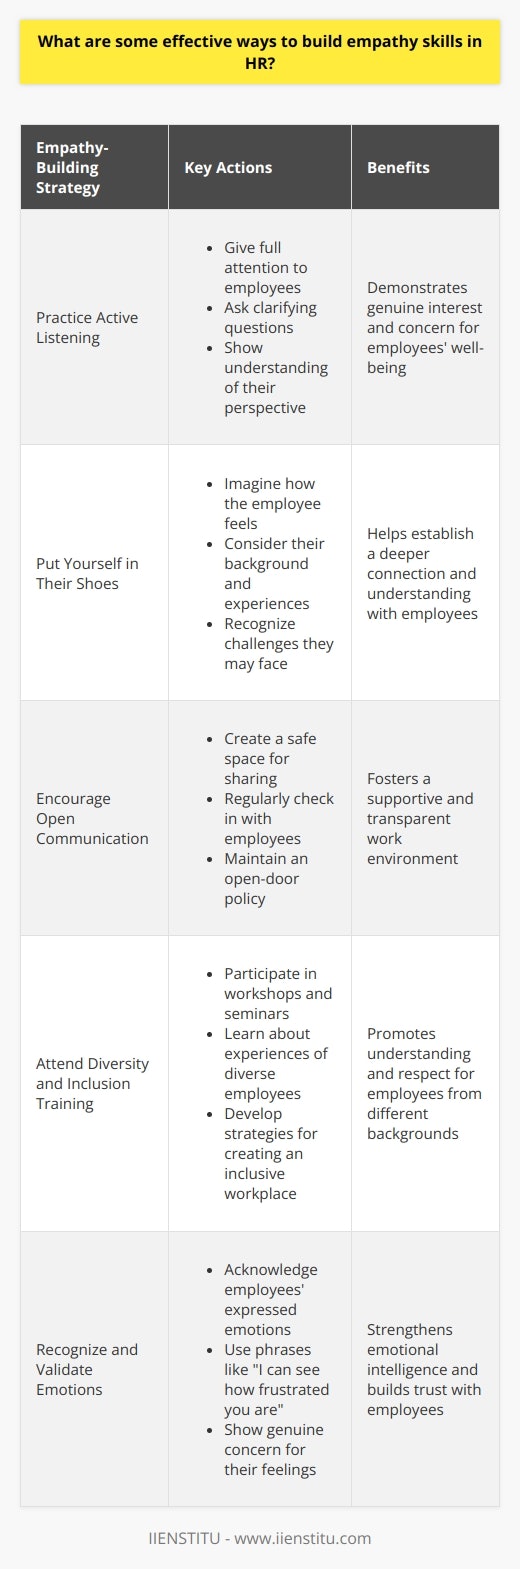 As an HR professional, building empathy skills is crucial for creating a positive work environment. Here are some effective ways to develop empathy in HR: Practice Active Listening When an employee comes to you with a concern, give them your full attention. Listen carefully, ask clarifying questions, and show that you understand their perspective. Put Yourself in Their Shoes Try to imagine how the employee feels in their situation. Consider their background, experiences, and challenges they may be facing. This helps you connect with them on a deeper level. Encourage Open Communication Create a safe space where employees feel comfortable sharing their thoughts and feelings. Regularly check in with them, and let them know your door is always open. Attend Diversity and Inclusion Training Participating in workshops and seminars can help you understand the experiences of employees from different backgrounds. Youll learn how to create a more inclusive workplace. Recognize and Validate Emotions When an employee expresses an emotion, acknowledge it. Saying something like,  I can see how frustrated you are,  shows that you recognize and validate their feelings. Empathy is a skill that requires practice and dedication. I remember a time when an employee came to me in tears, overwhelmed by personal and work-related stress. By listening attentively and showing genuine concern, I was able to provide the support they needed. Building empathy takes time, but its worth the effort. When employees feel understood and valued, theyre more engaged and productive. As an HR professional, empathy is one of the most powerful tools in your toolkit.